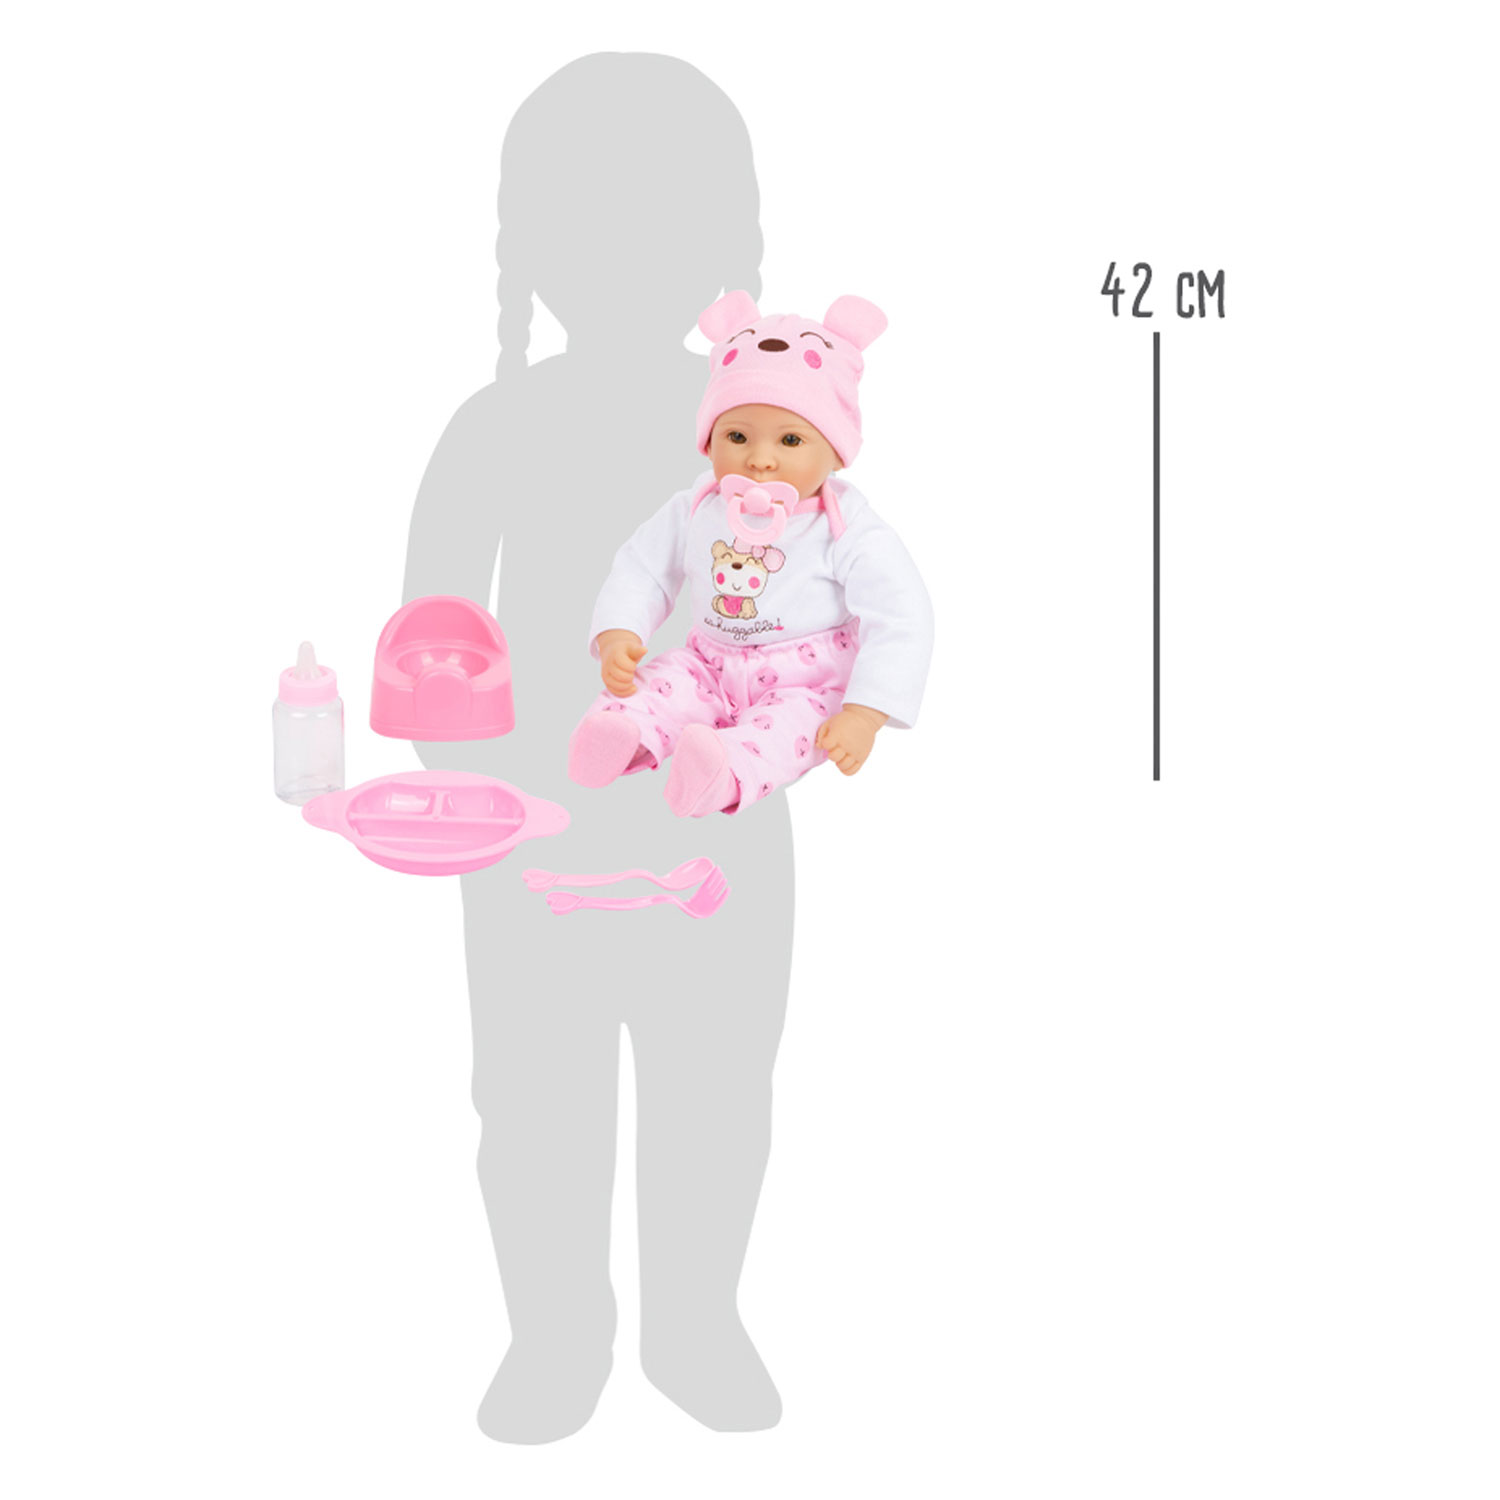 Small Foot - Baby Doll Marie avec accessoires, 7dlg.